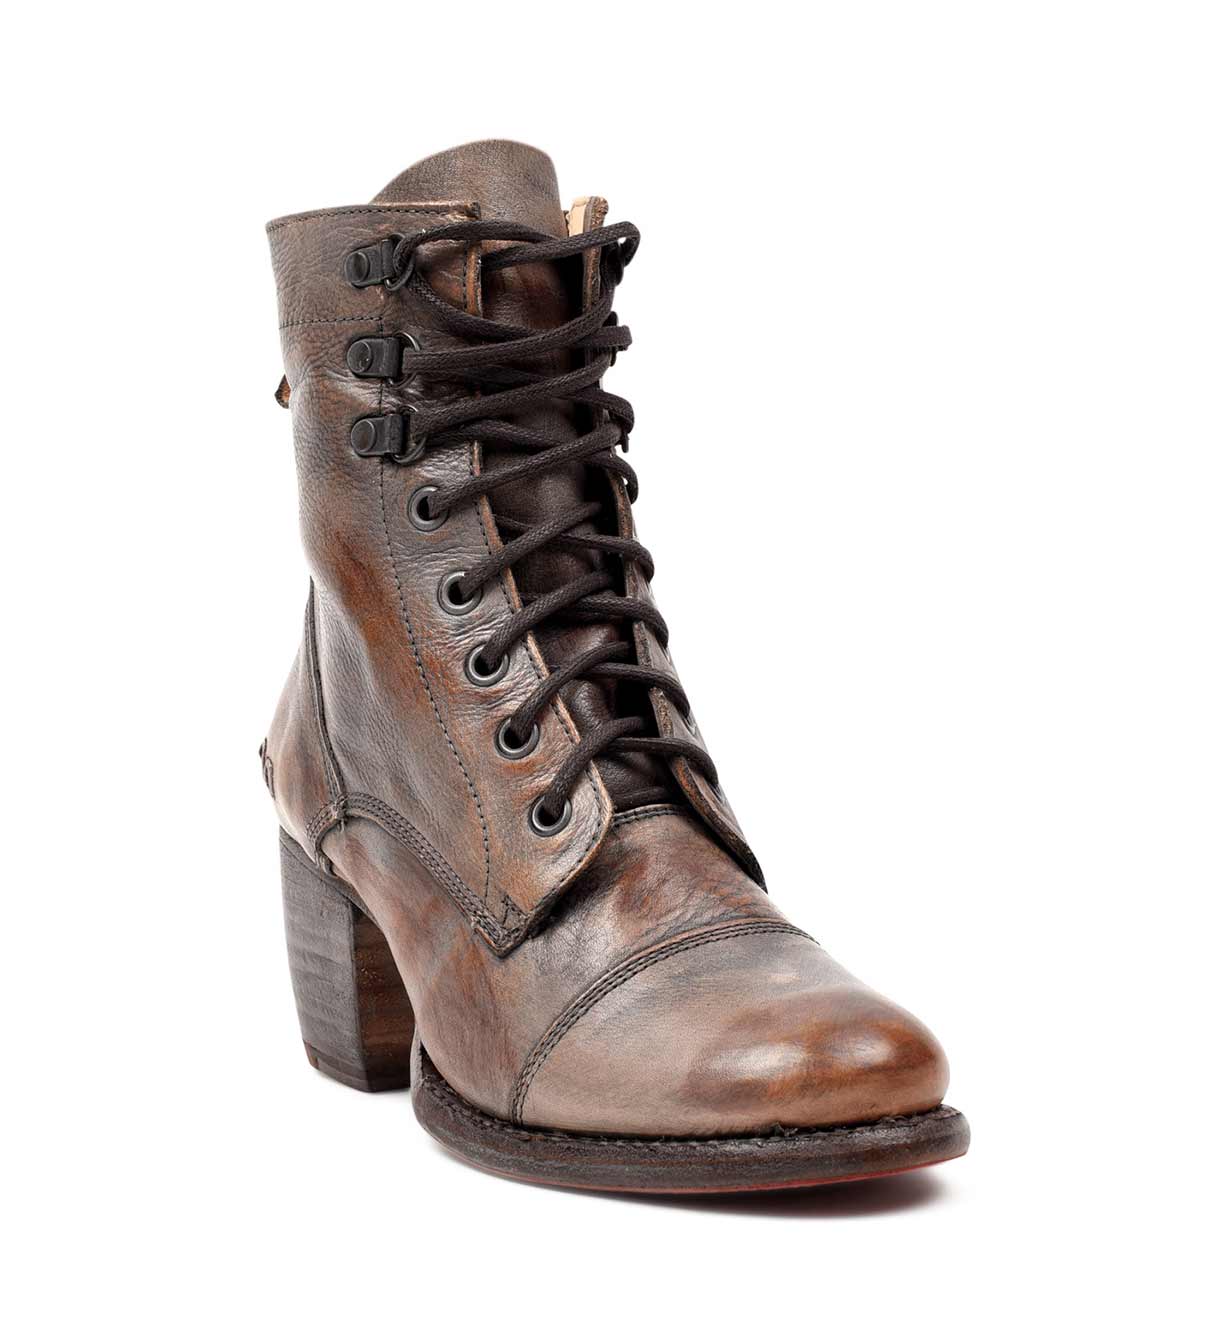 A women's brown leather boot with laces called Judgement by Bed Stu.